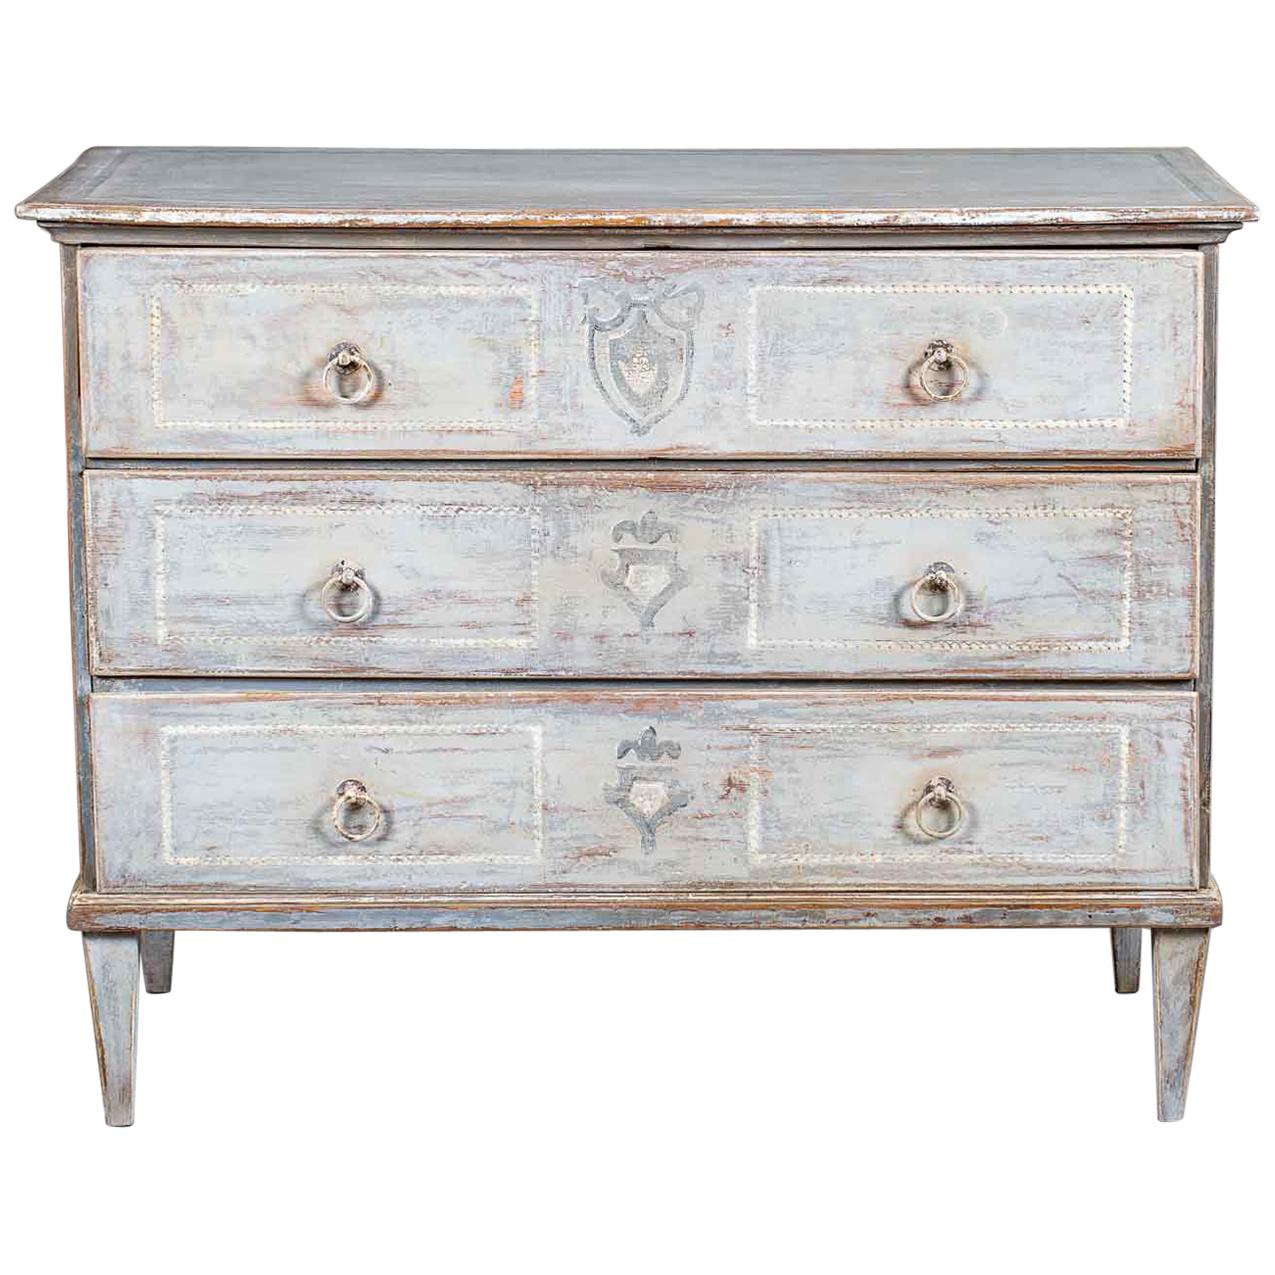 Neoclassical Antique Austrian Three-Drawer Painted Chest, circa 1830